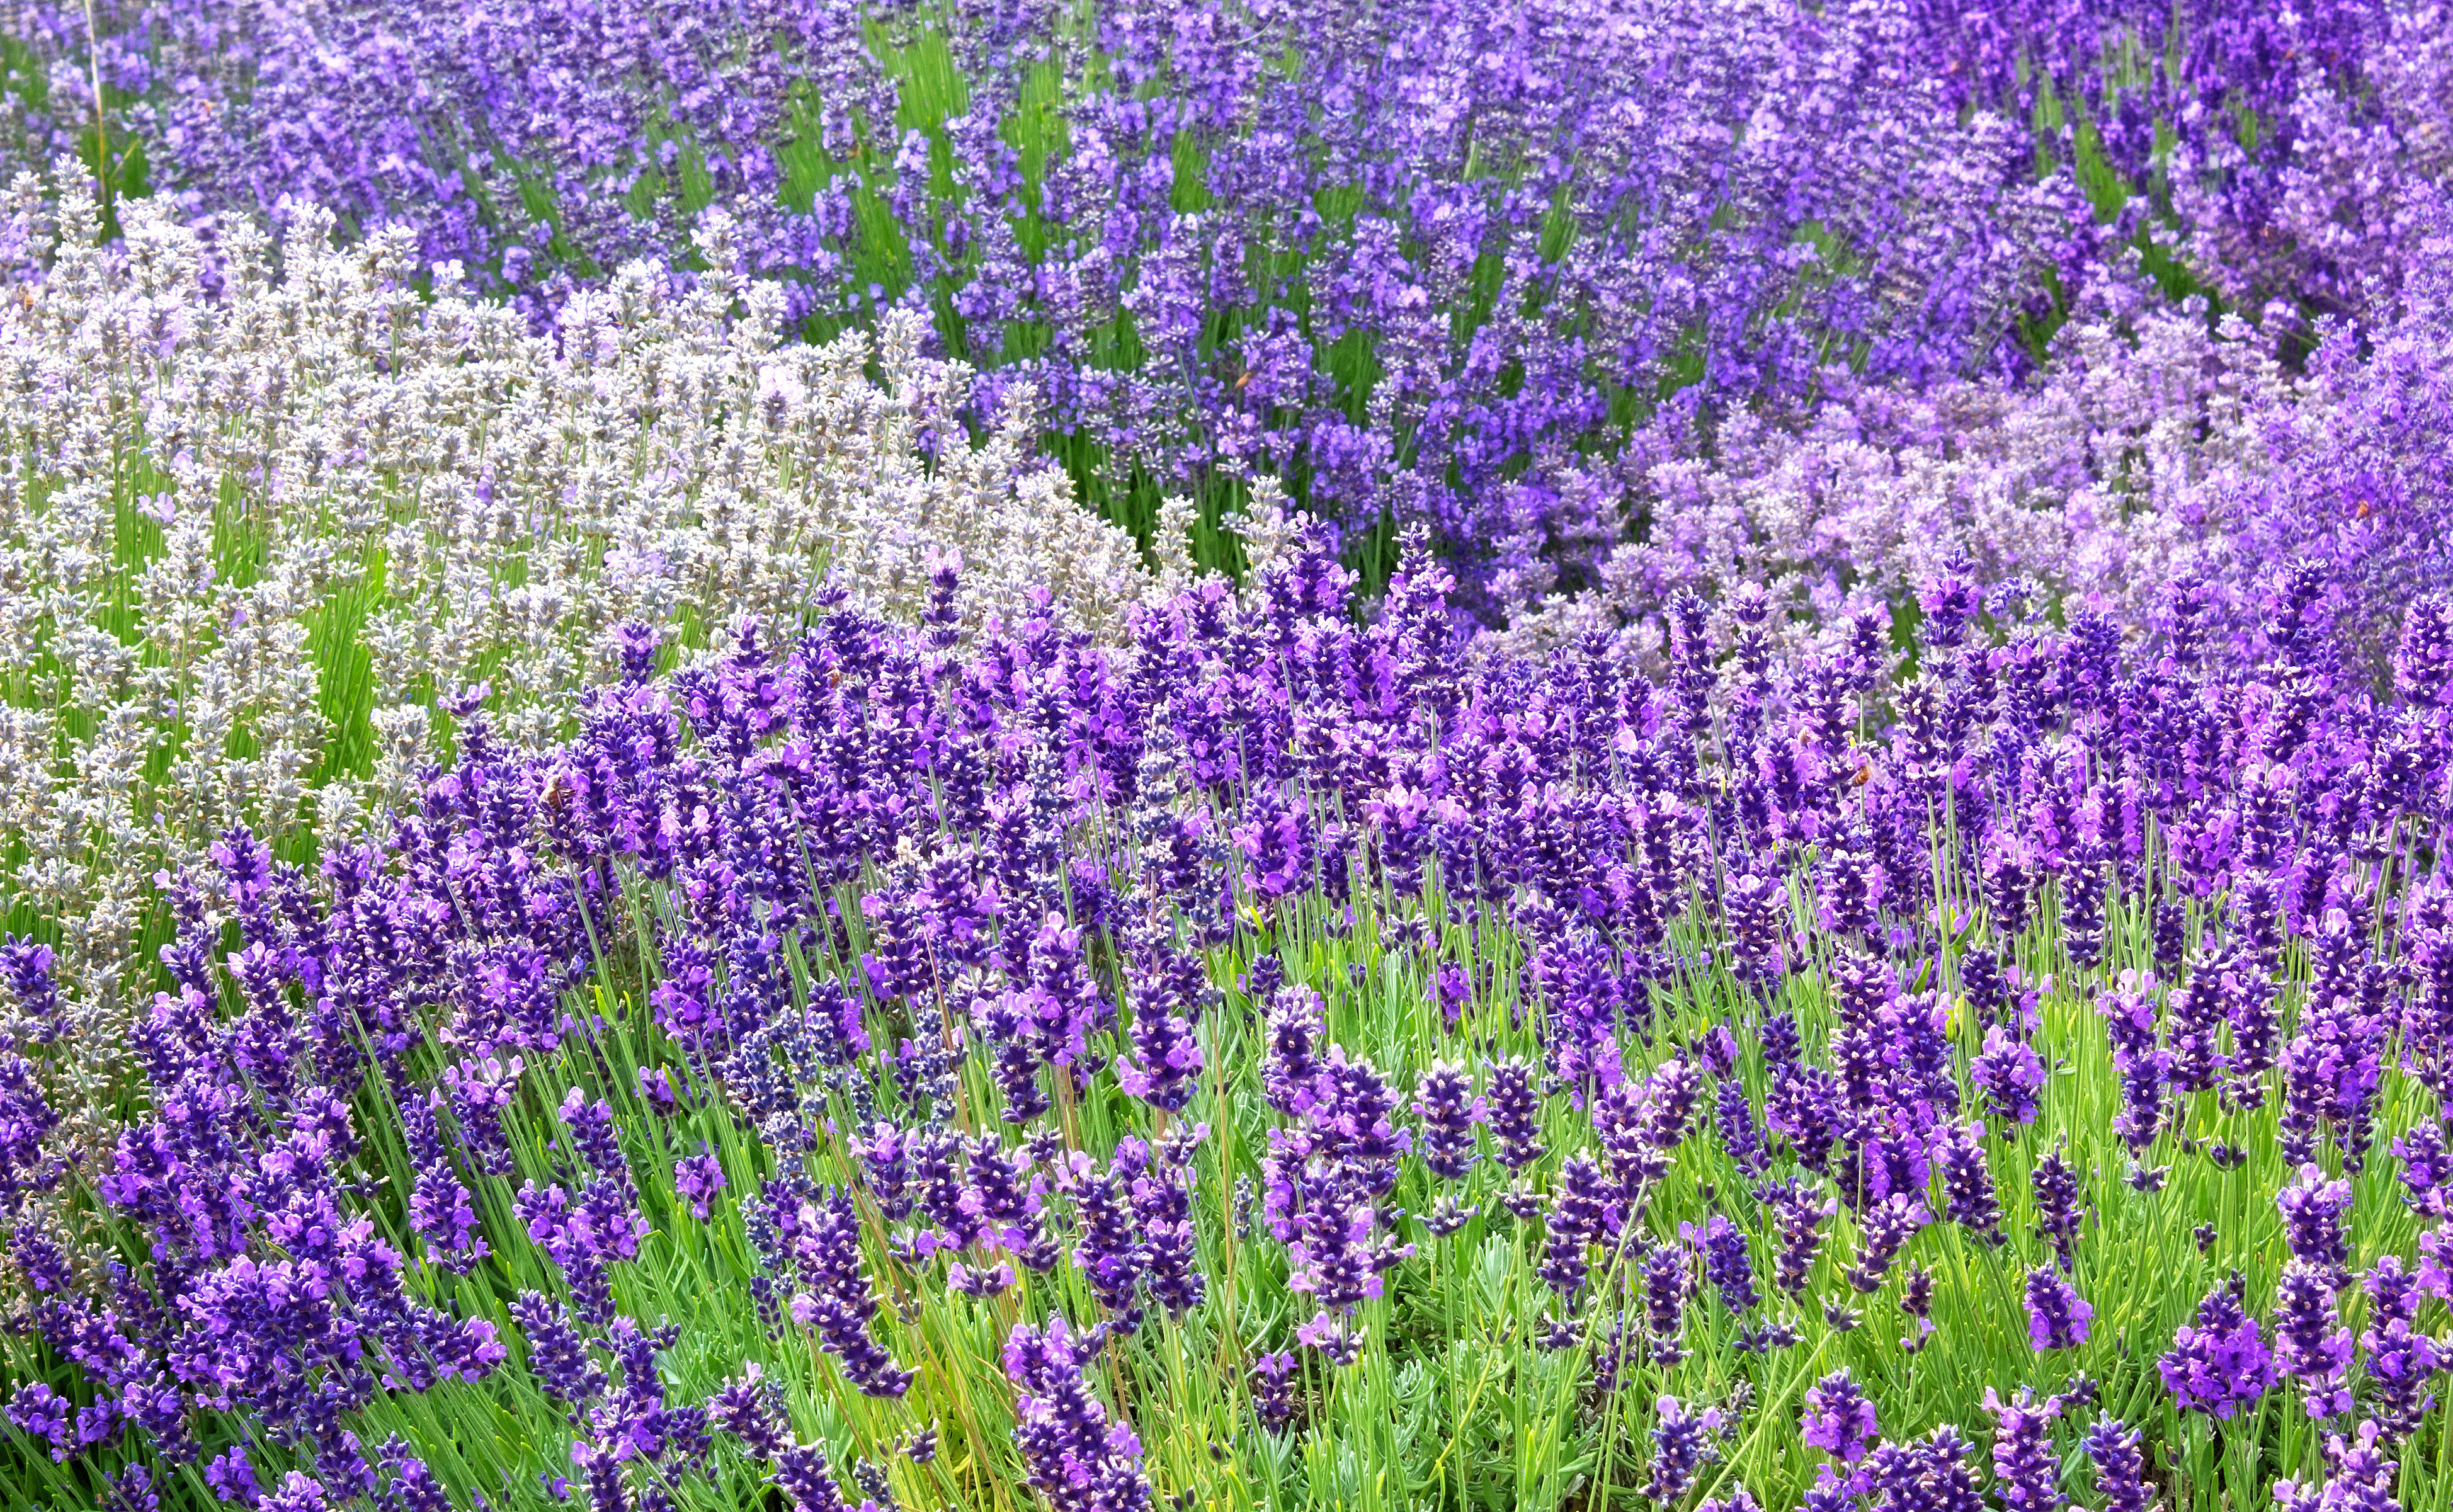 The Health Benefits of Lavender - Clean Eating Online